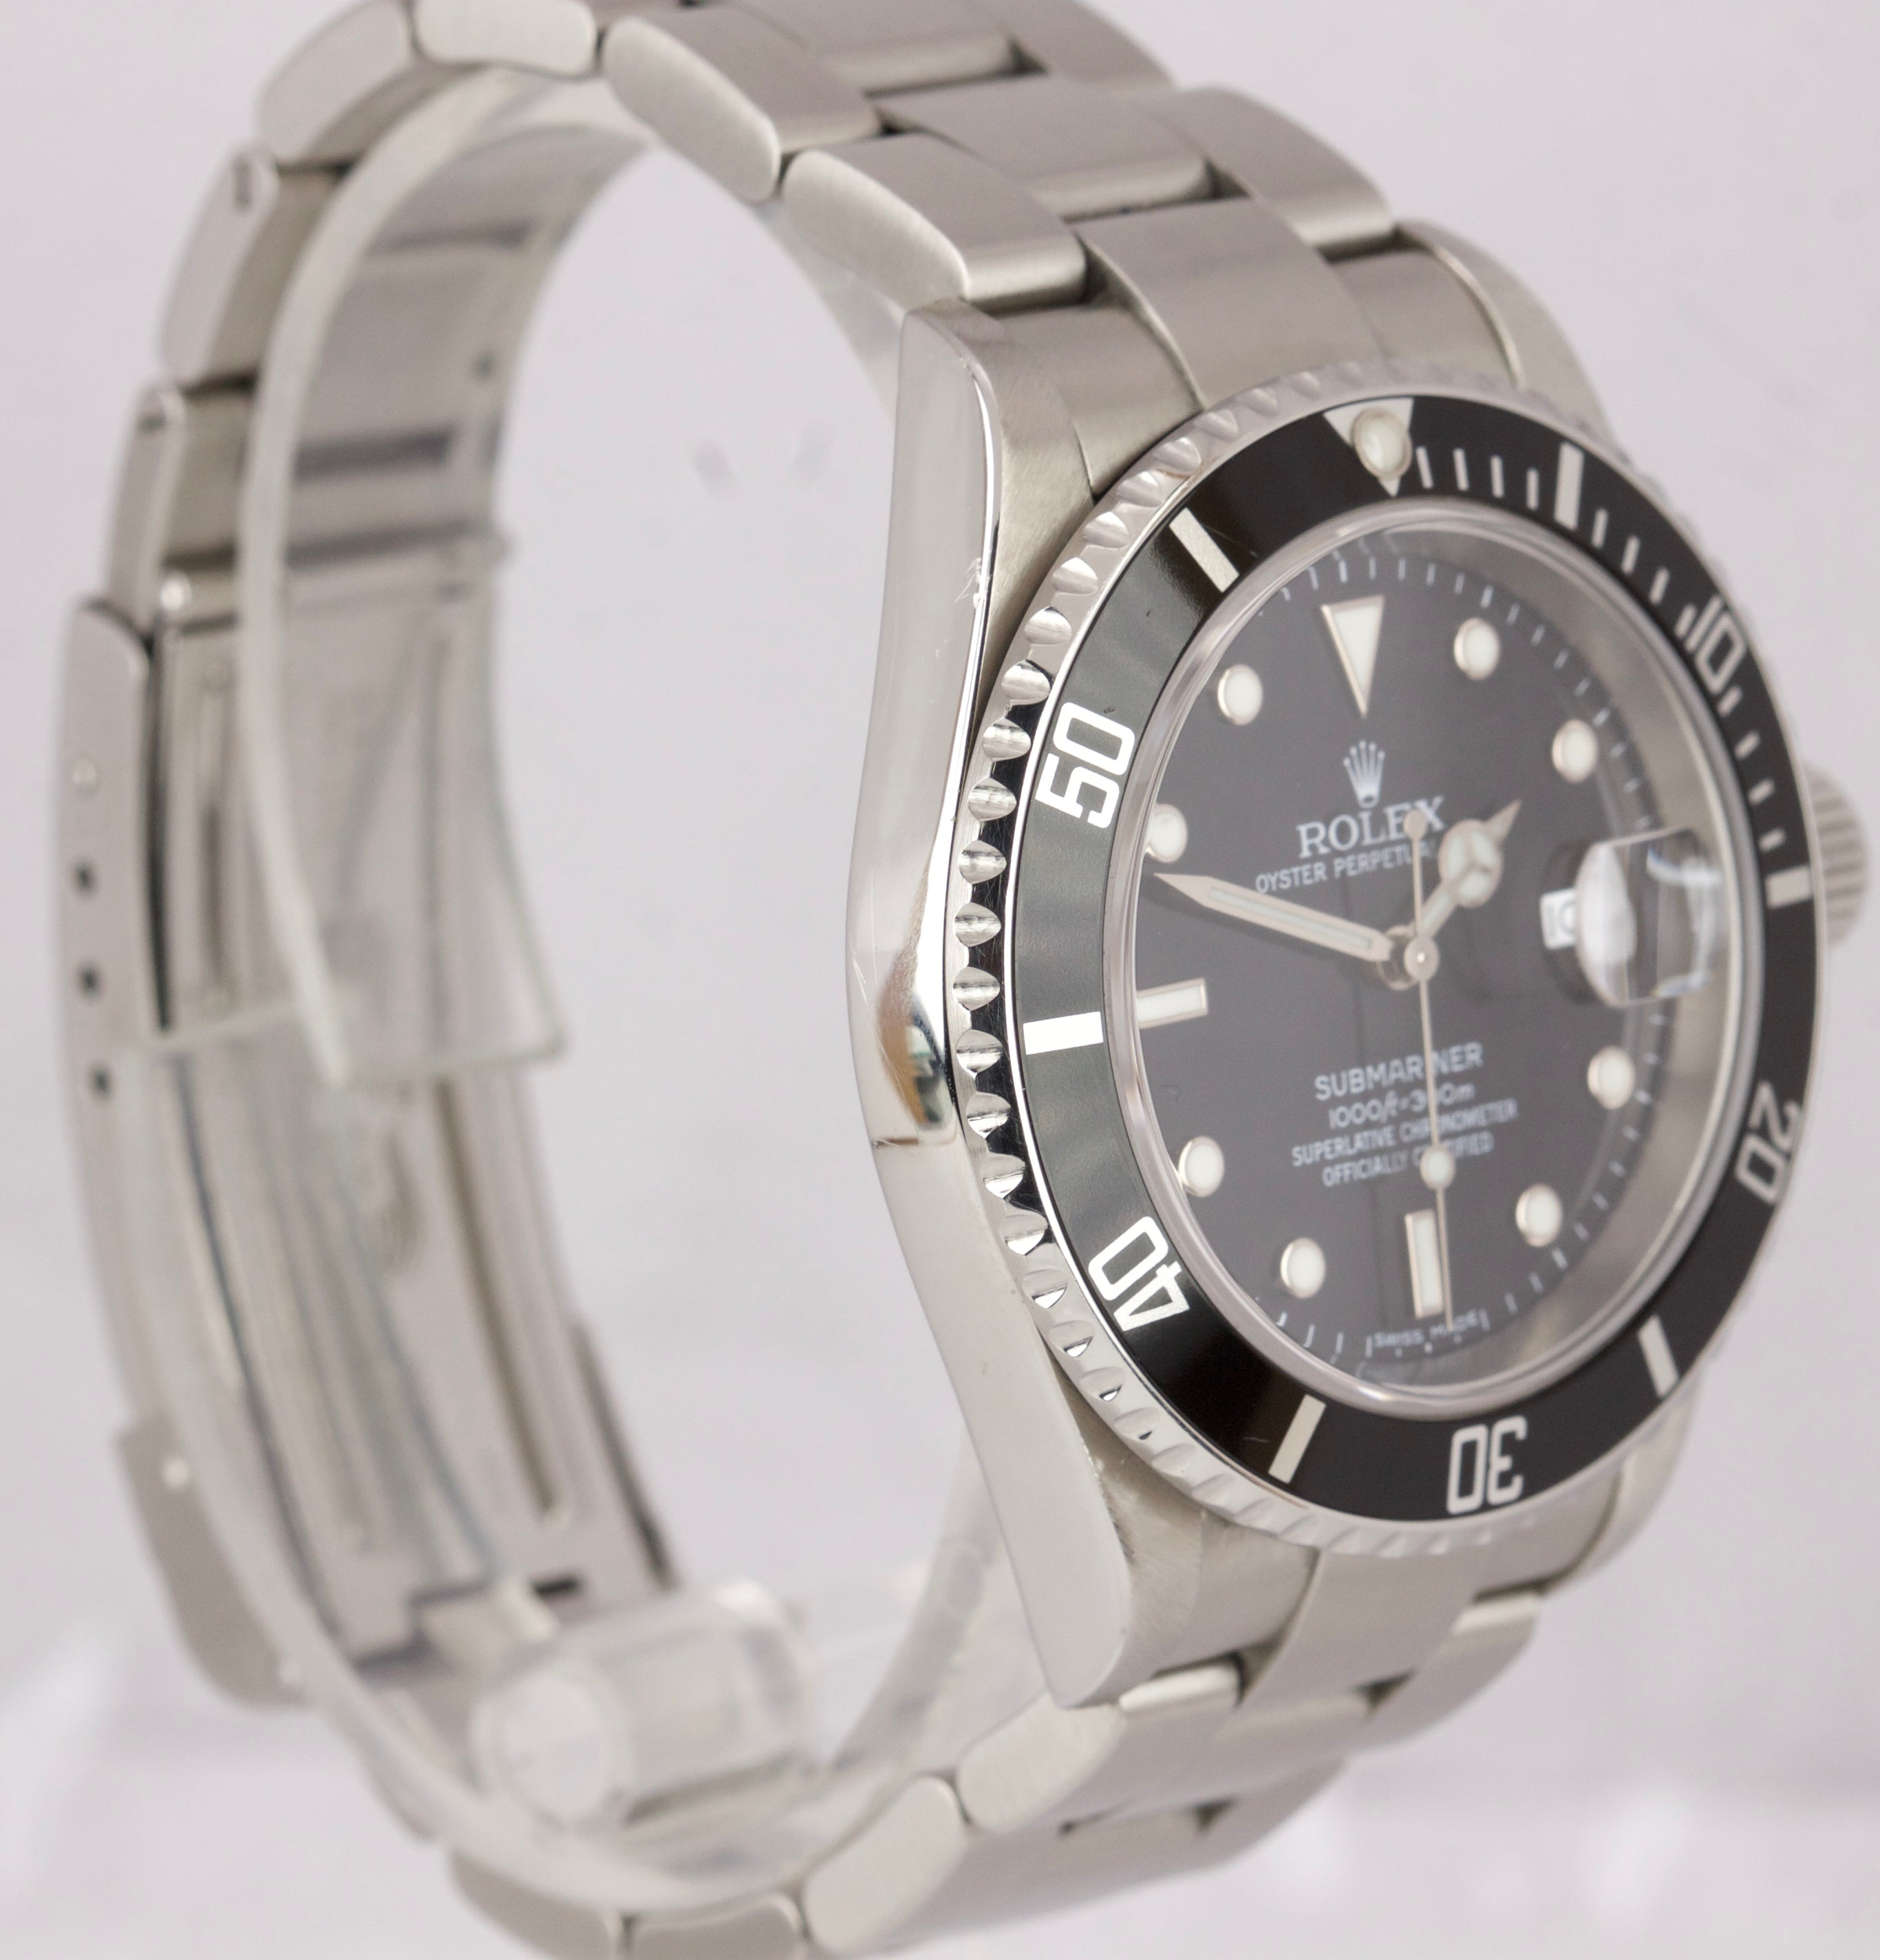 2007 Rolex Submariner Date 16610 T Stainless Dive Watch SEL NO-HOLES Pre-Ceramic